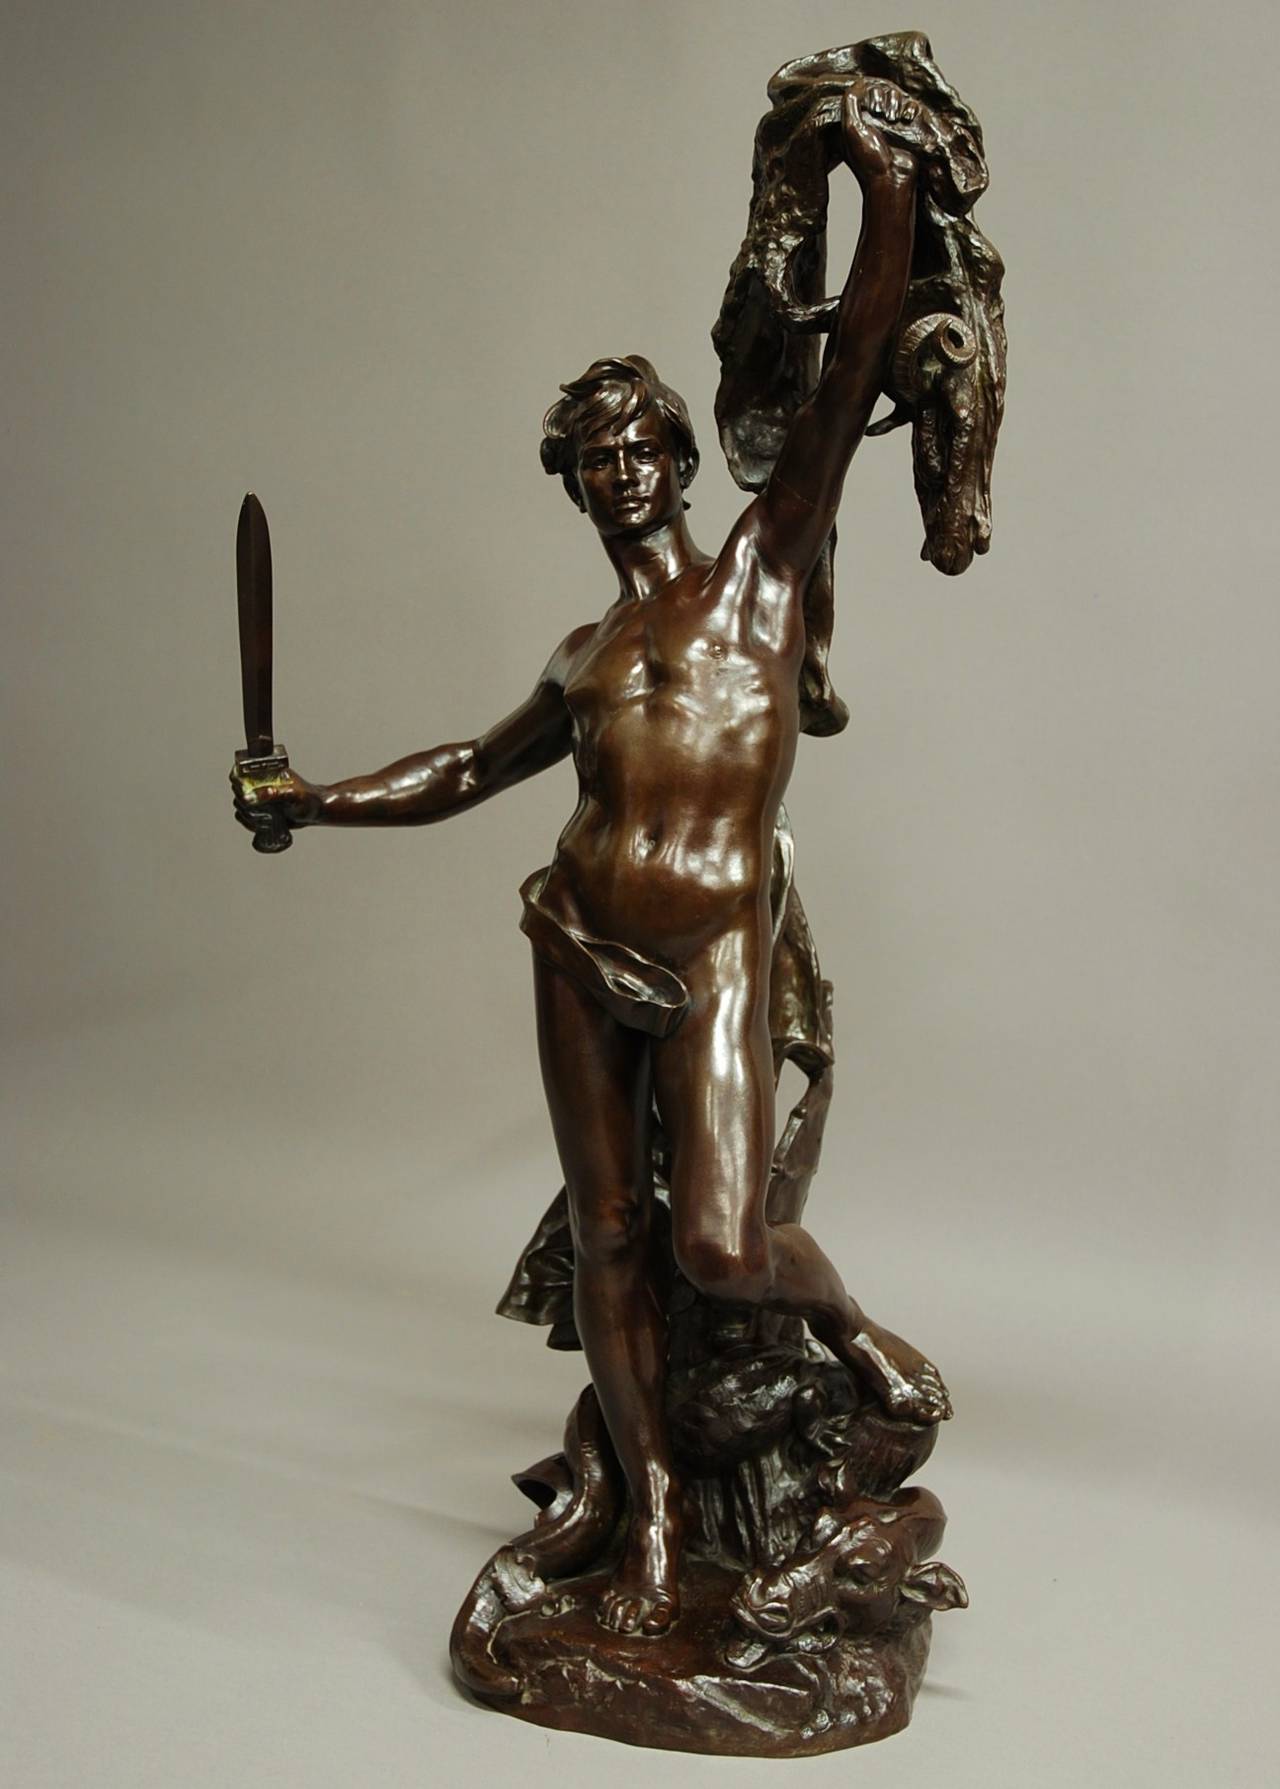 A large bronze of 'Jason and the Golden Fleece' by Alfred Desire Lanson (1851-1898).

This bronze has a rich dark brown patination and is in excellent condition dating around 1895.

The figure is portrayed with a sword in his right hand, holding